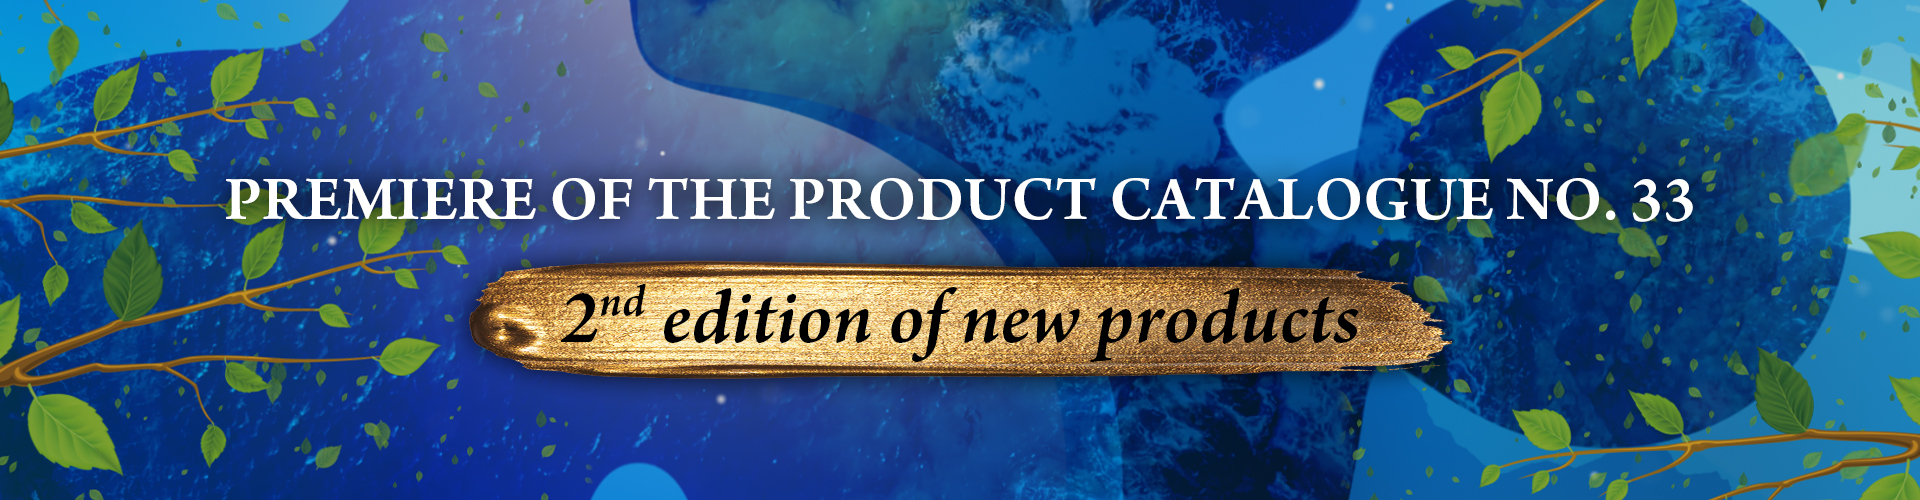 SECOND EDITION OF THE PRODUCT CATALOGUE NO. 33